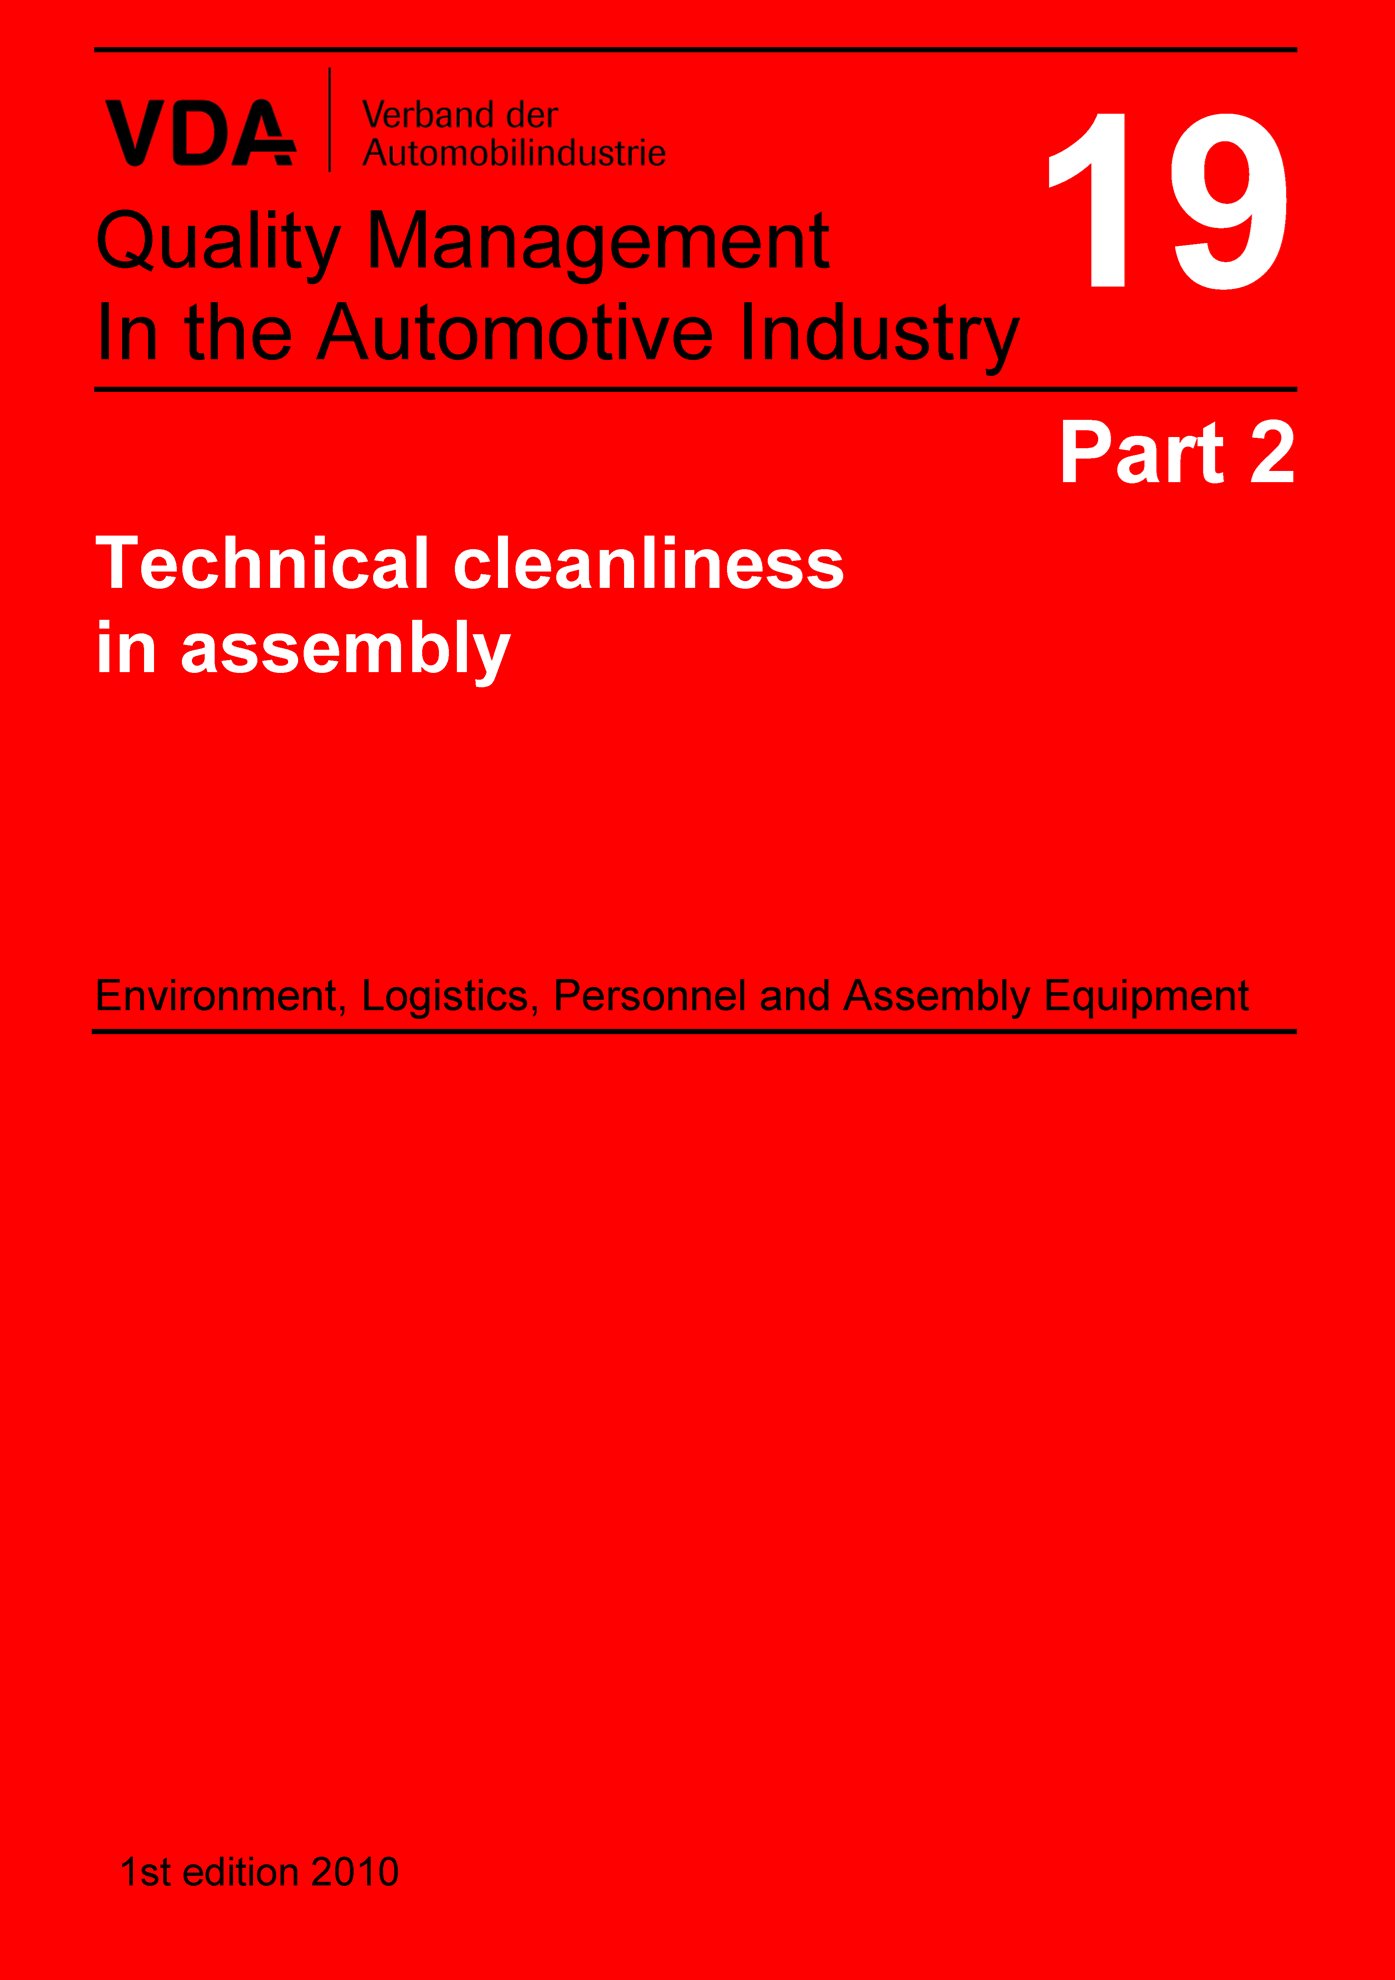 Publications  VDA Volume 19 Part 2, Technical cleanliness in assembly - Environment, Logistics, Personnel and Assembly Equipment - 1st edition 2010 1.1.2010 preview